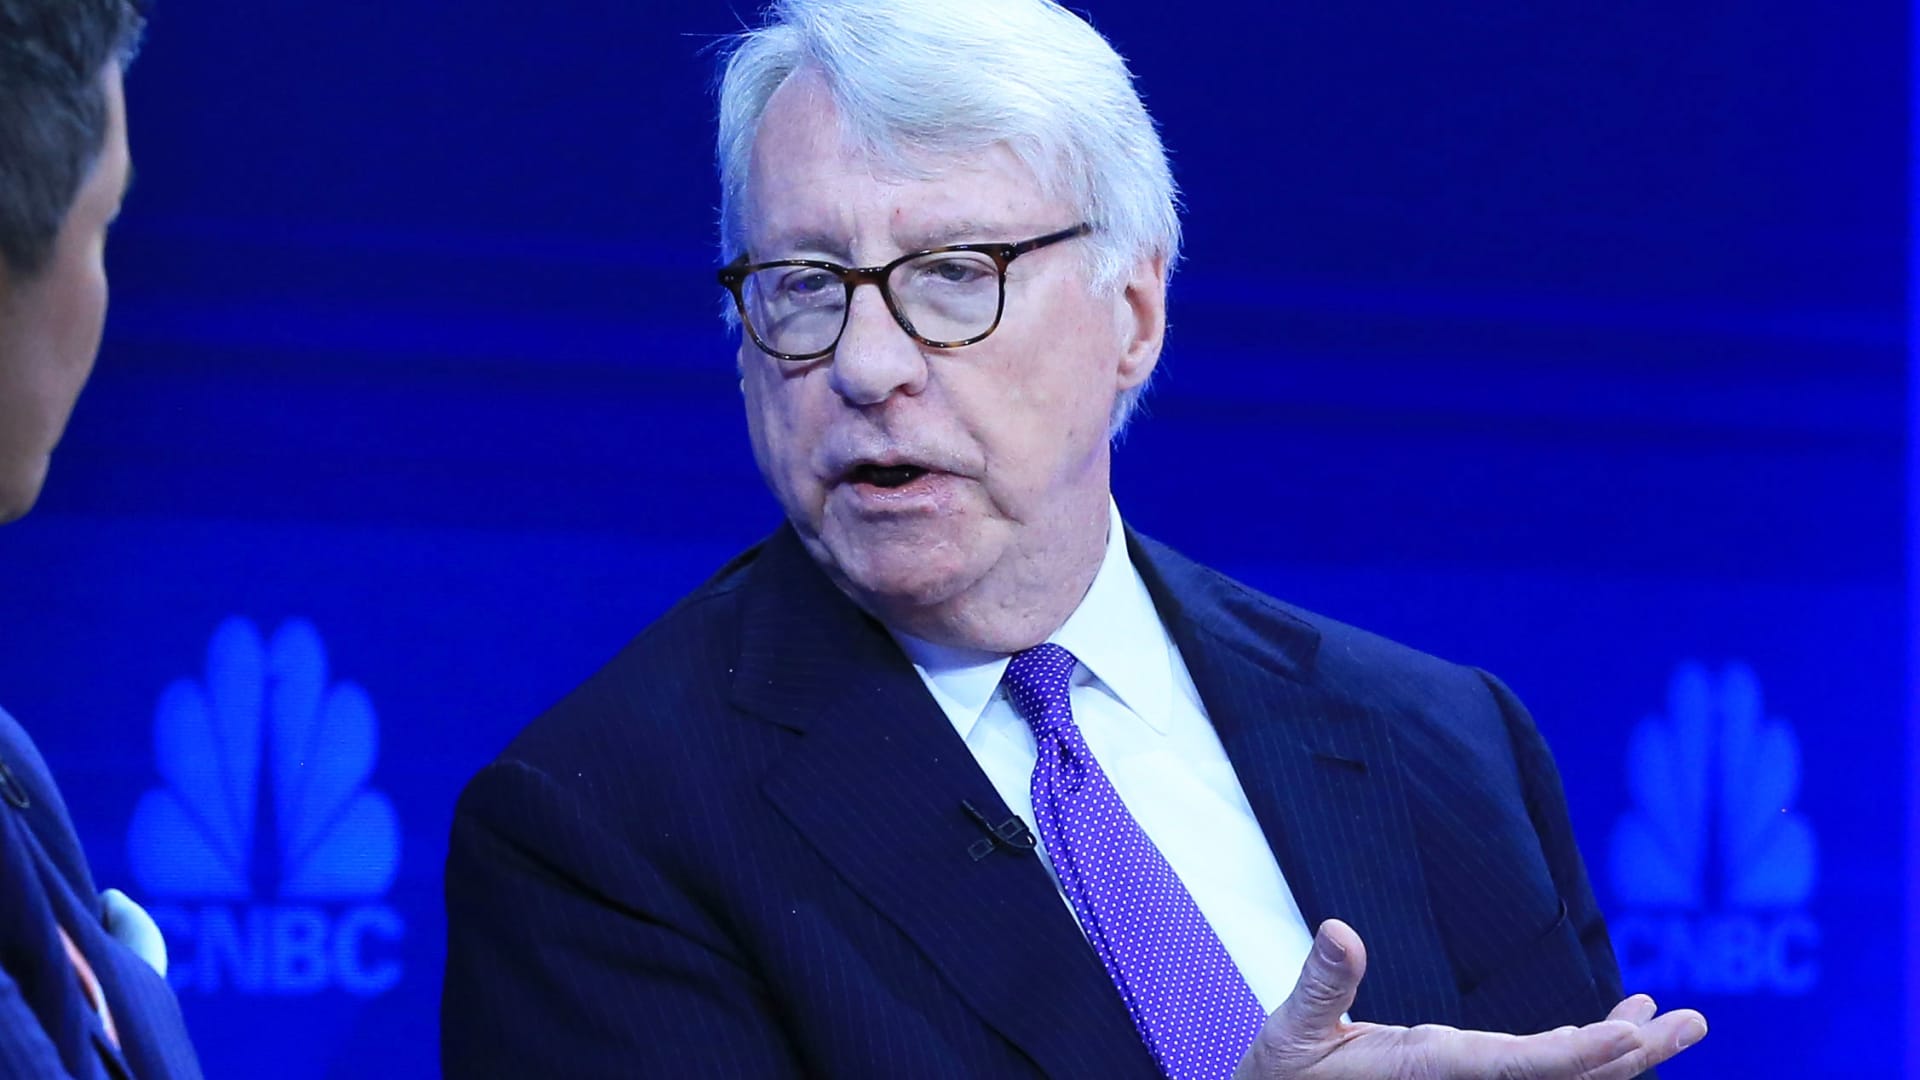 Jim Chanos, the short seller who called Enron's fall, is converting hedge fund to a family office